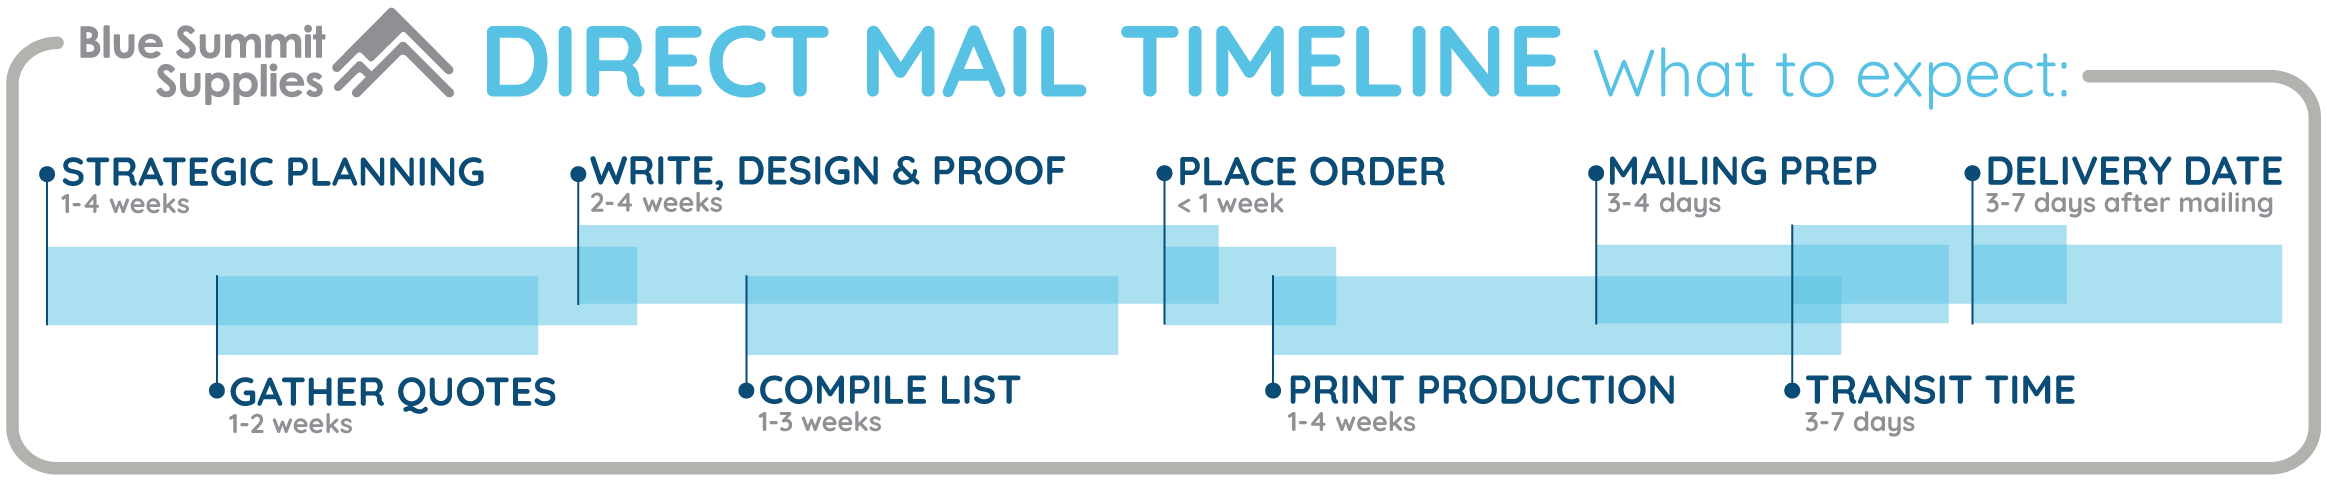 Direct mail timeline: Best time to send direct mail